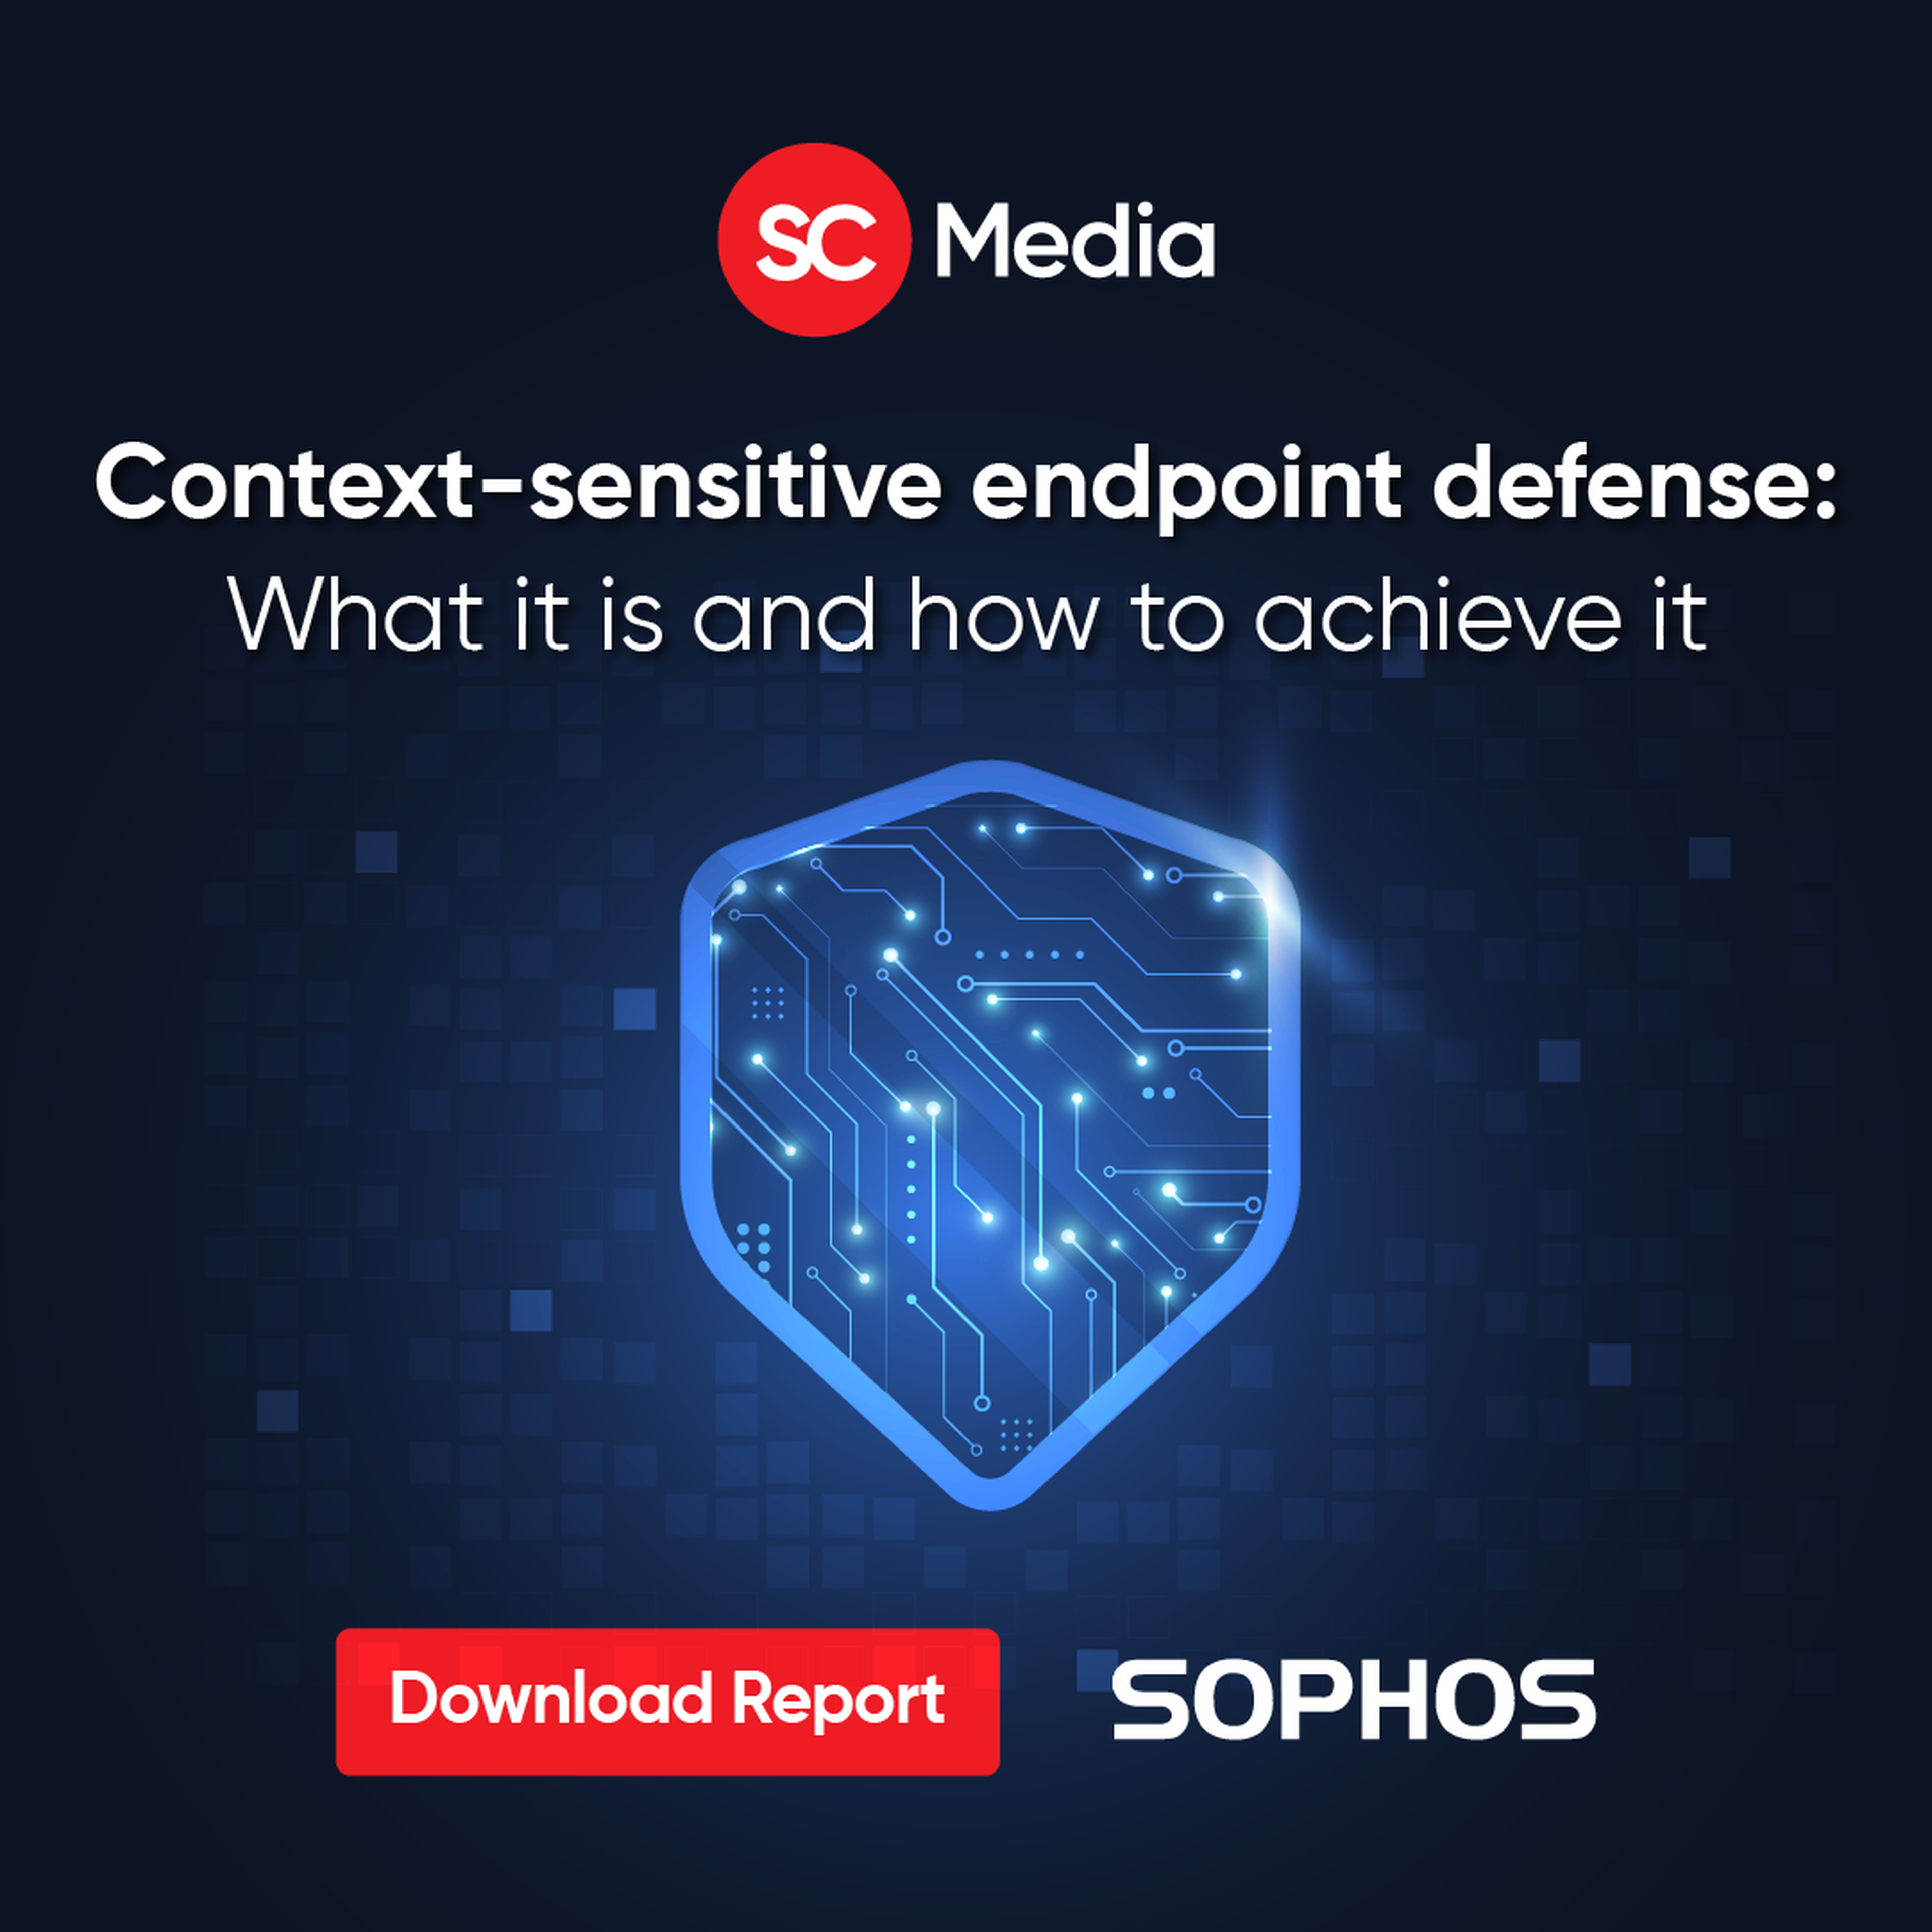 Context-sensitive endpoint defense: What it is and how to achieve it